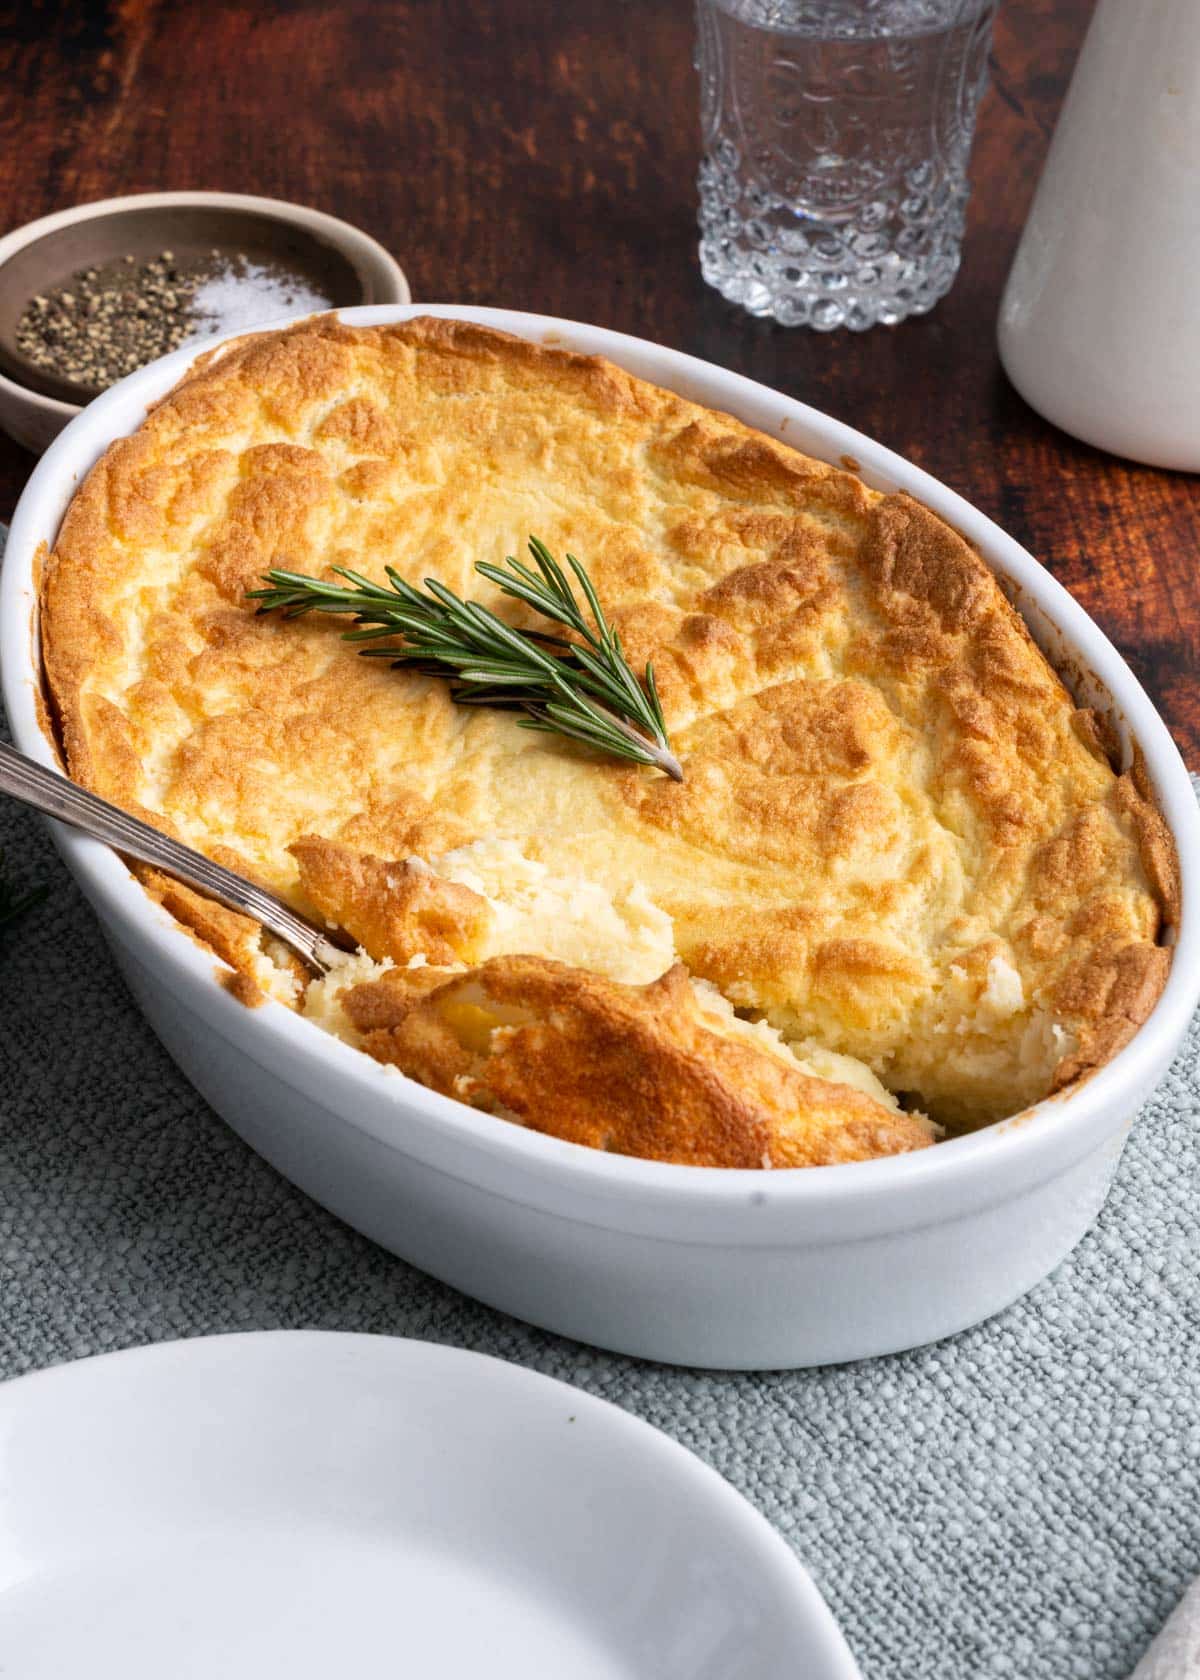 White oval casserole dish with a lightly browned puffy potato souffle topped with a sprig of rosemary.